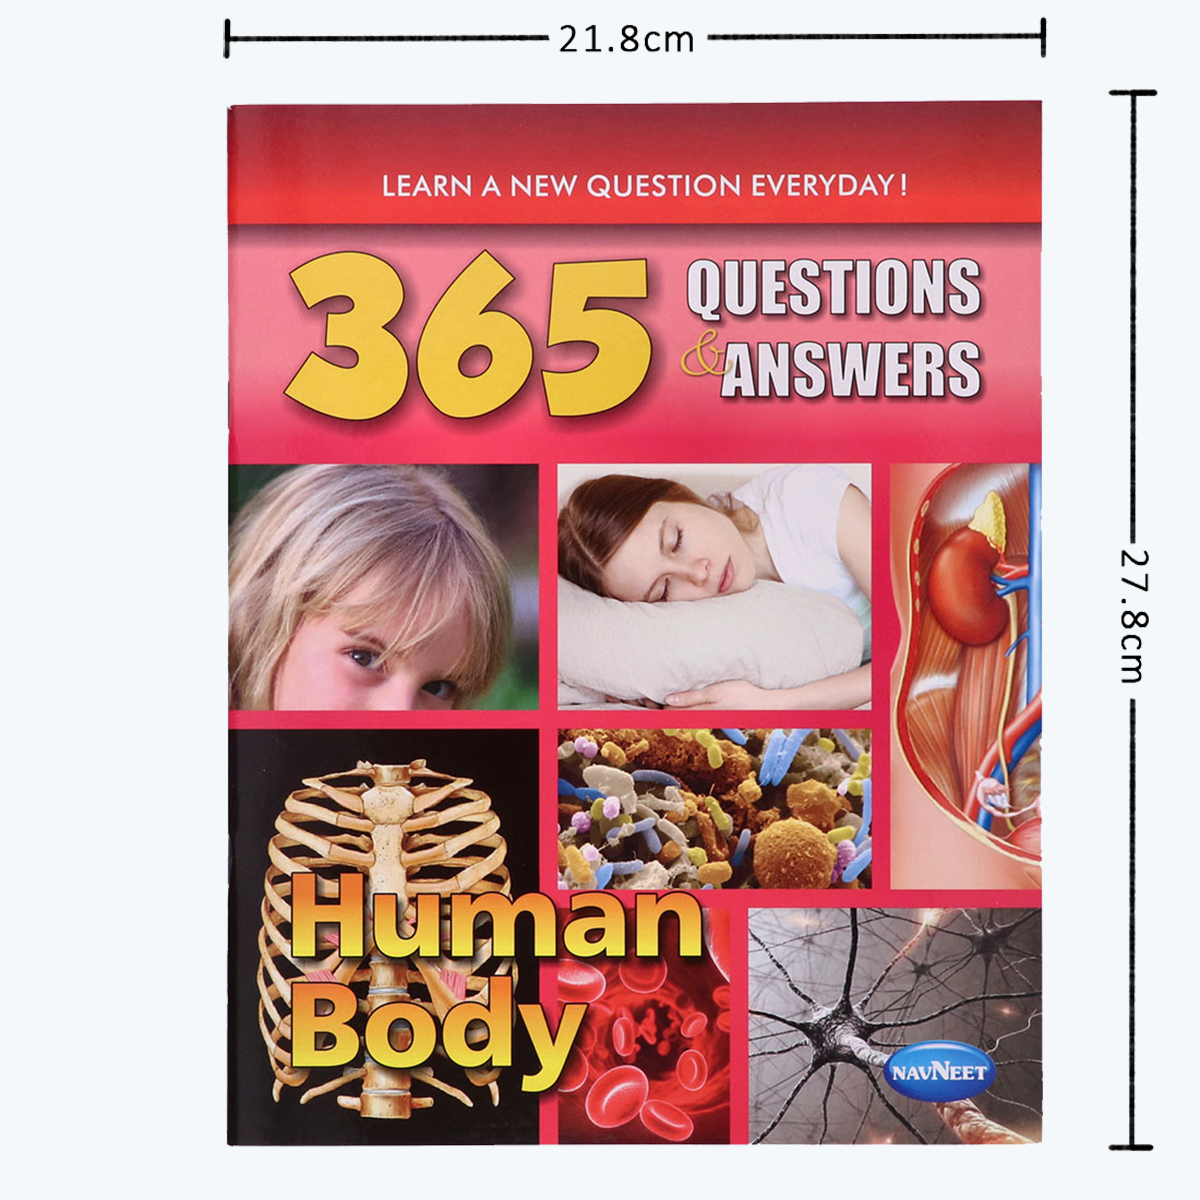 Navneet 365 Questions & Answers- Animal Kingdom, Birds & Human Body for Kids- Learn a new question everyday- General Knowledge Books- Nourish Young Minds- Information and Facts